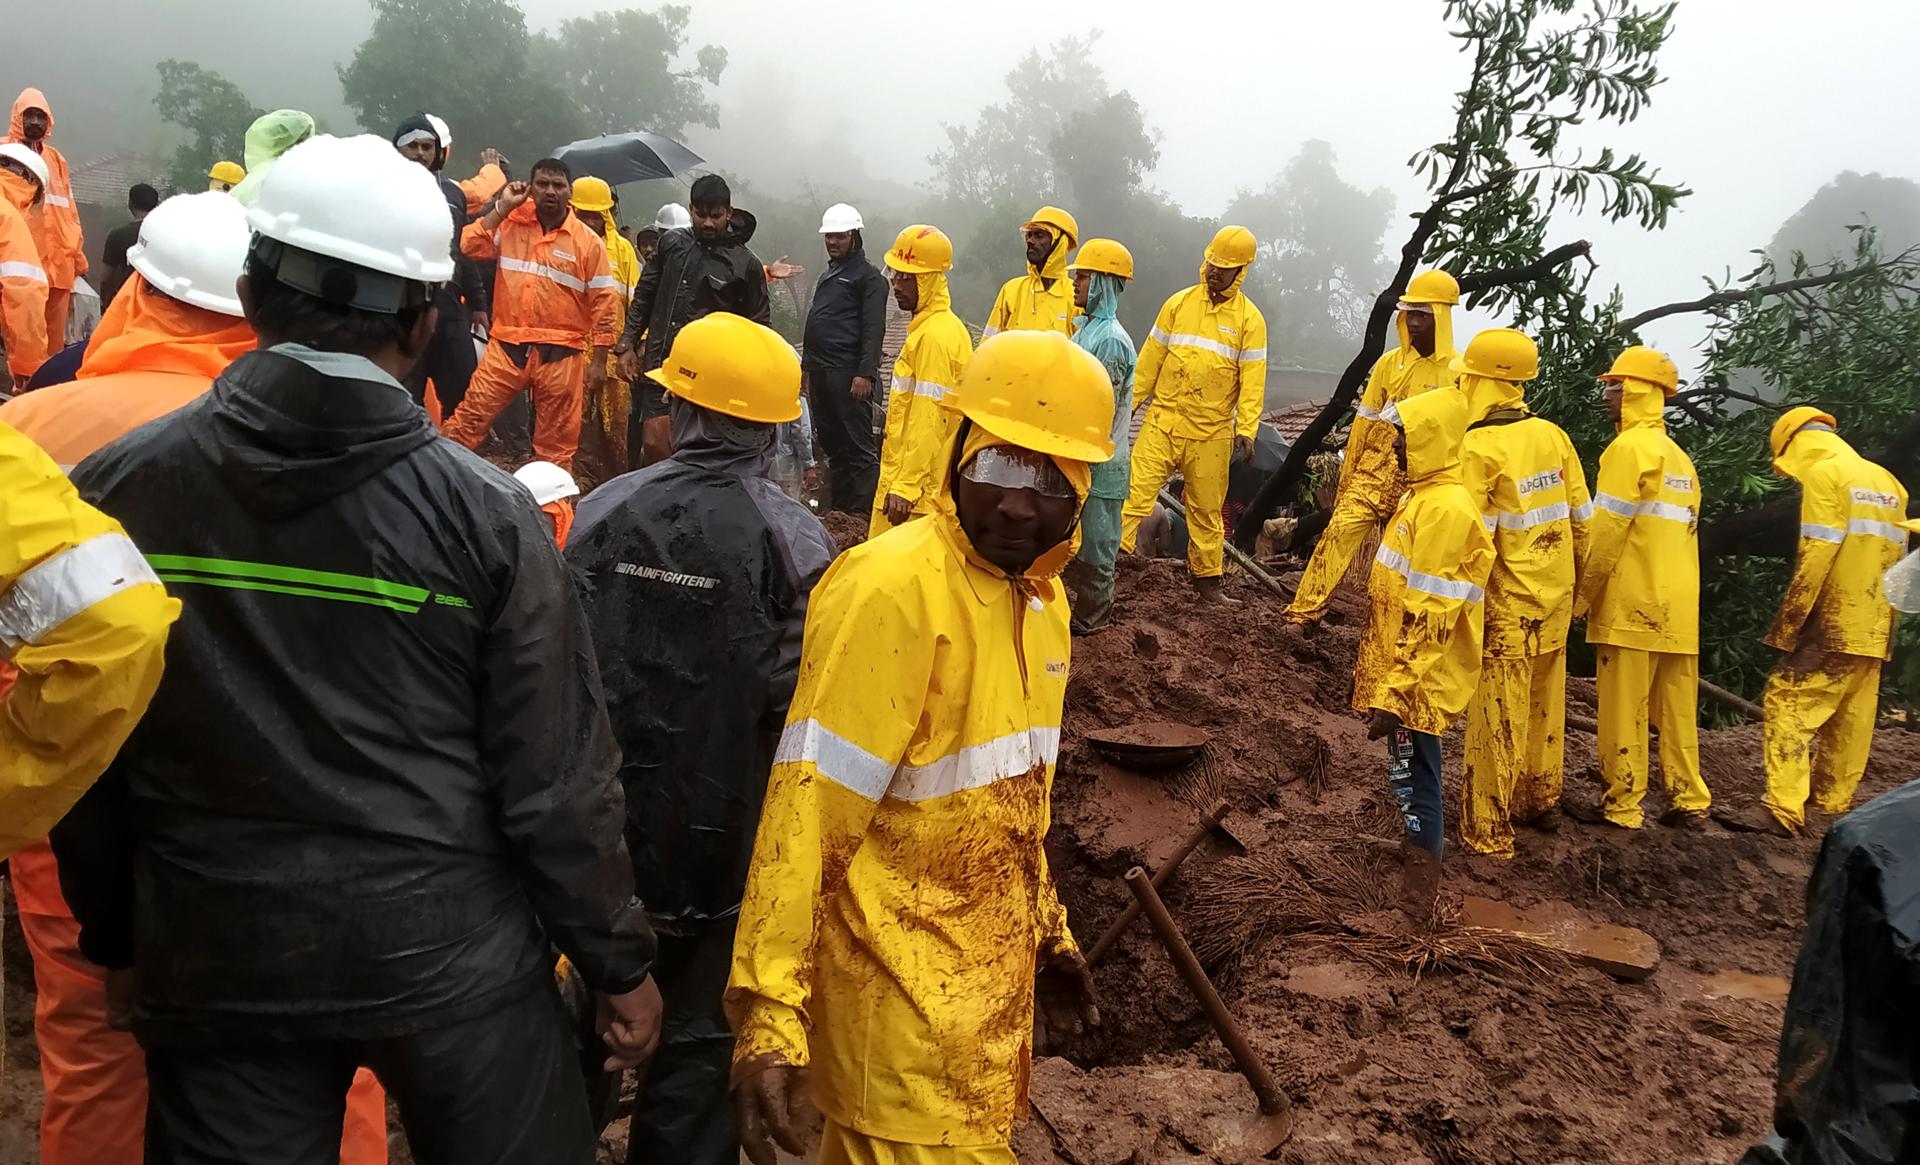 National Disaster Response Force (NDRF) personnel along with others perform a rescue operation after a landslide in Irshalwadi village in Raigad district, Maharashtra, India, 20 July 2023. EFE-EPA/DIVYAKANT SOLANKI
